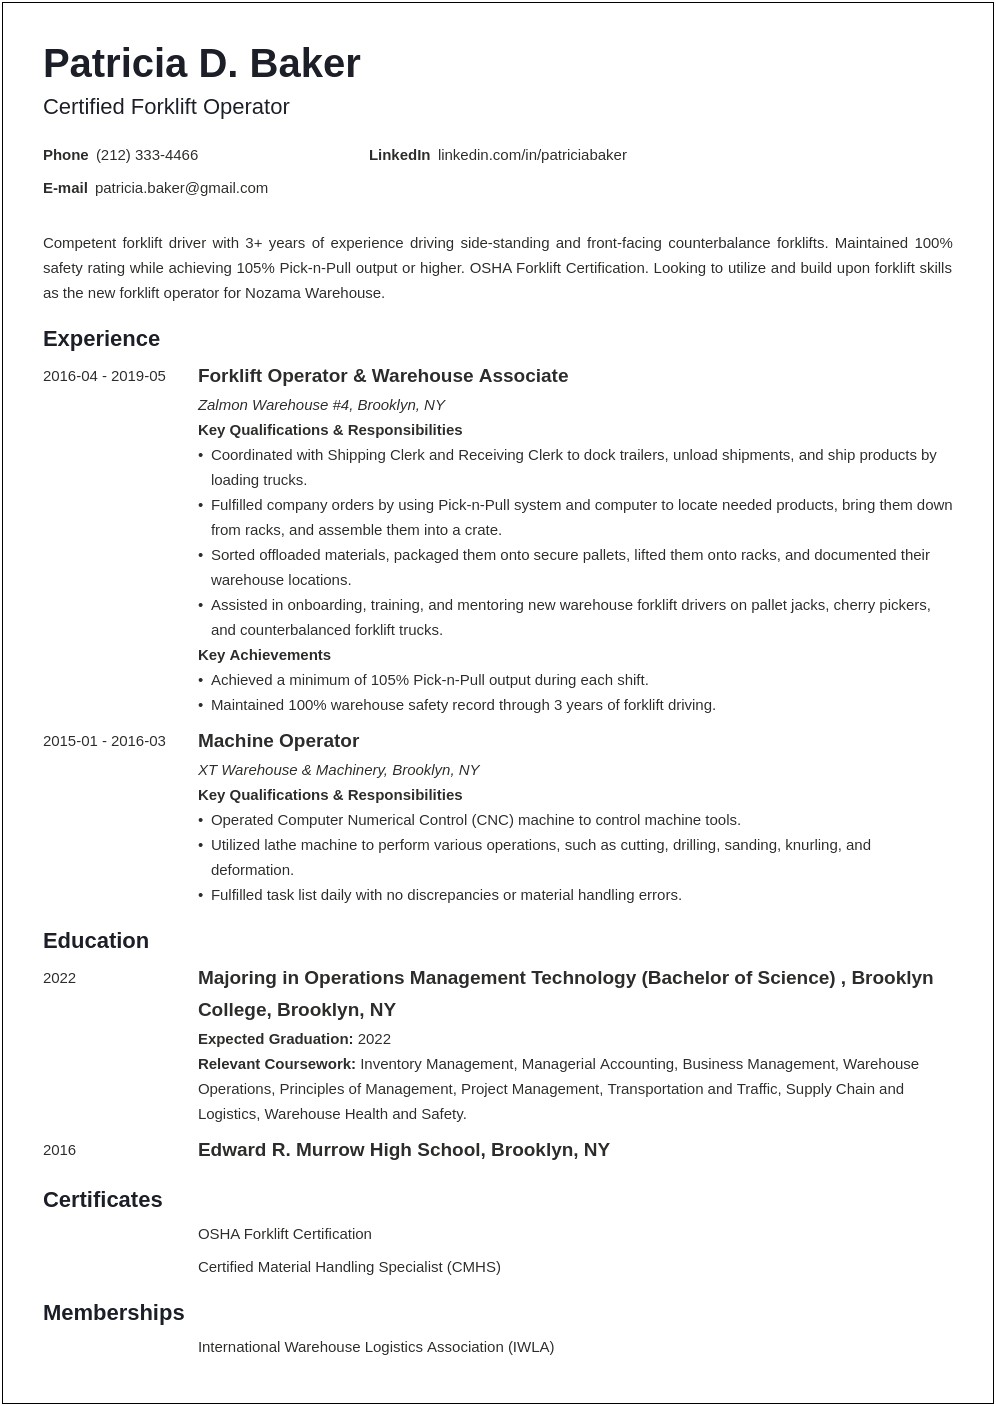 Objective Of Material Handling On Resume